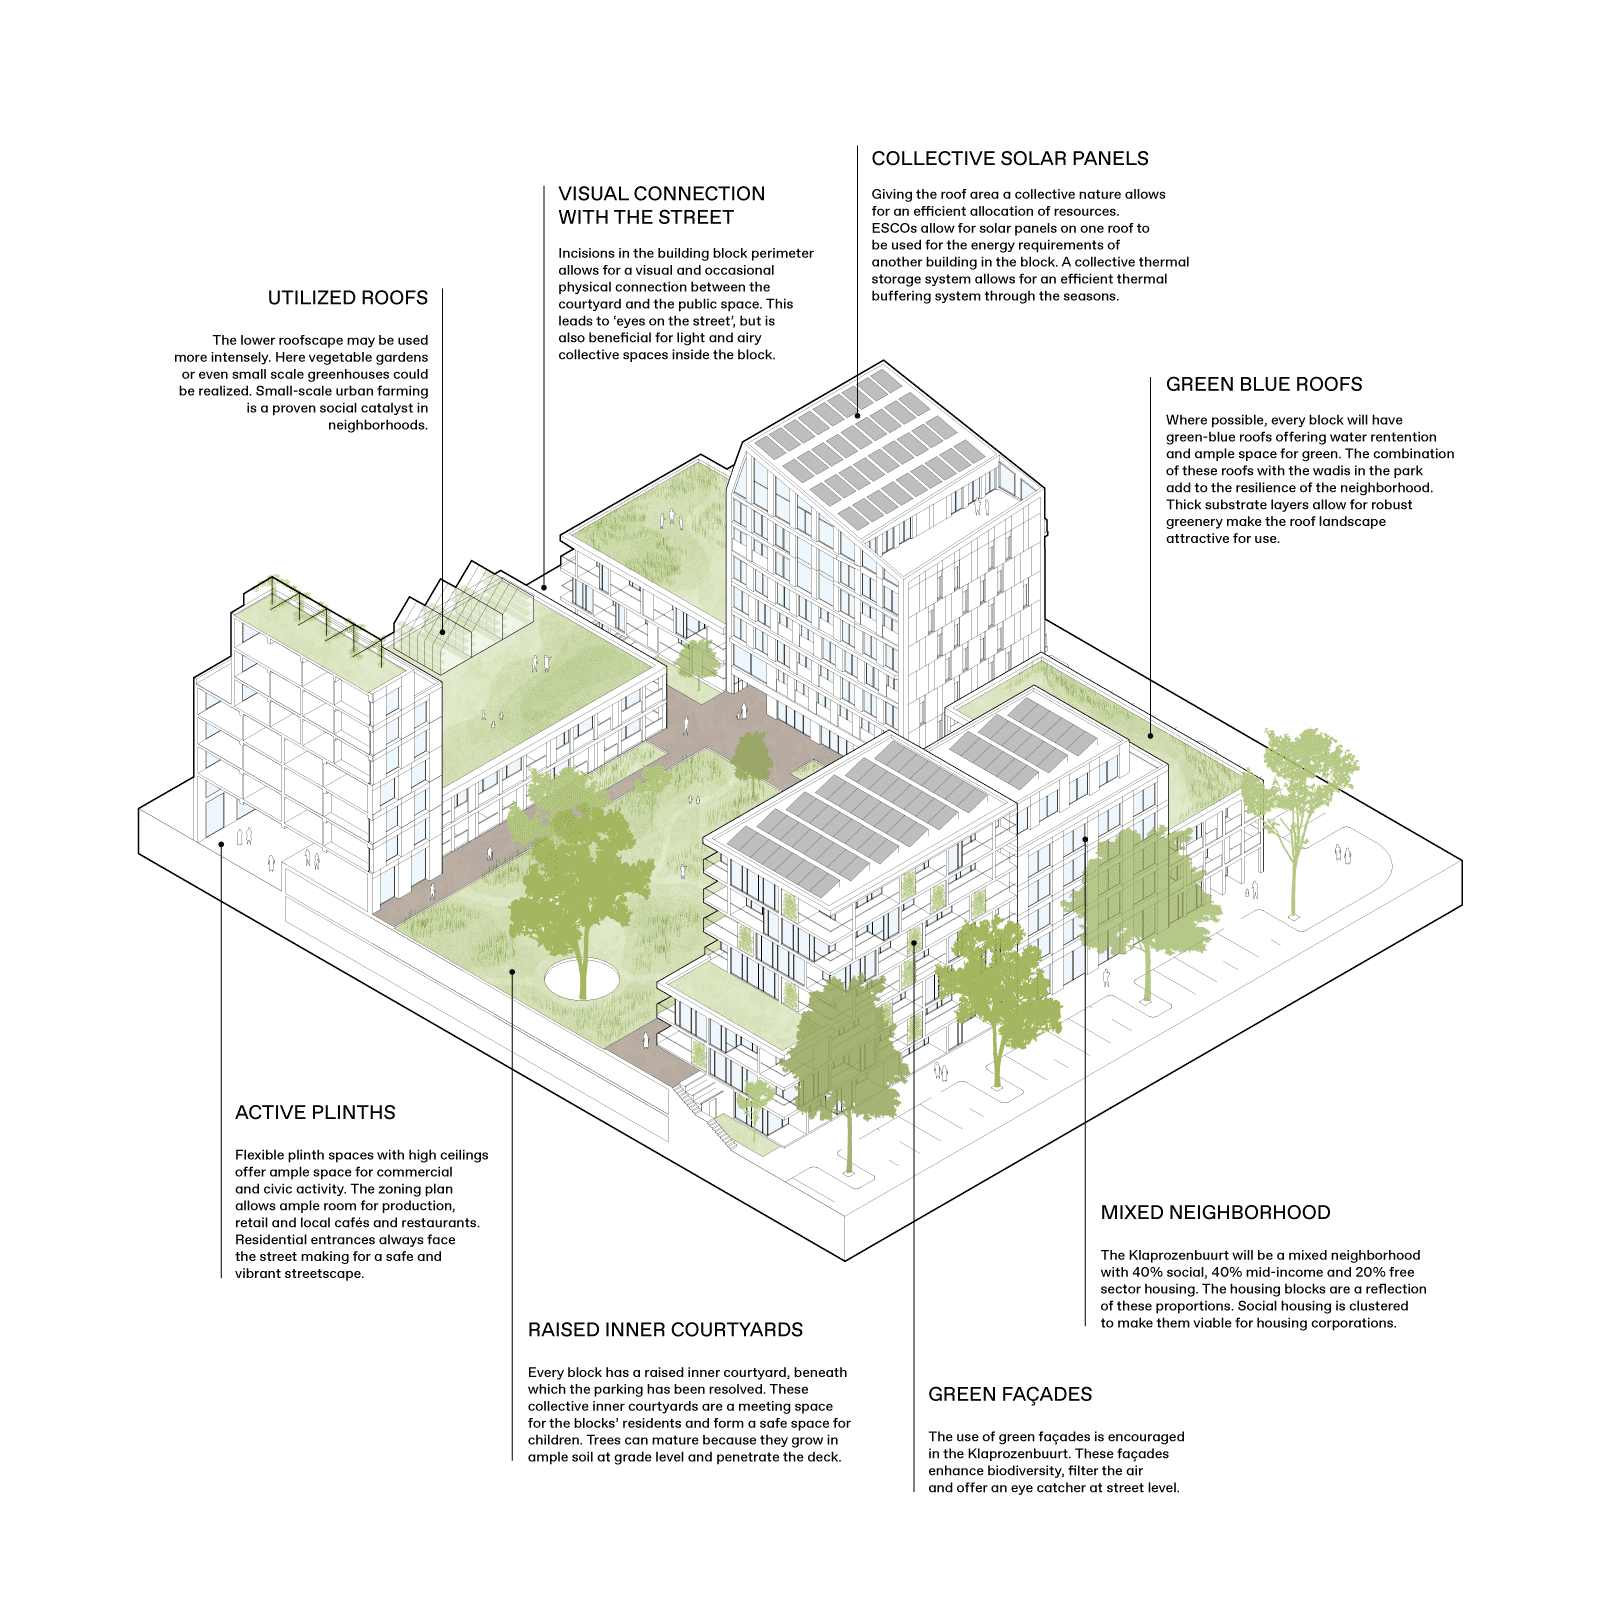 axonometric illustration of a housing block showing different components by Space&Matter